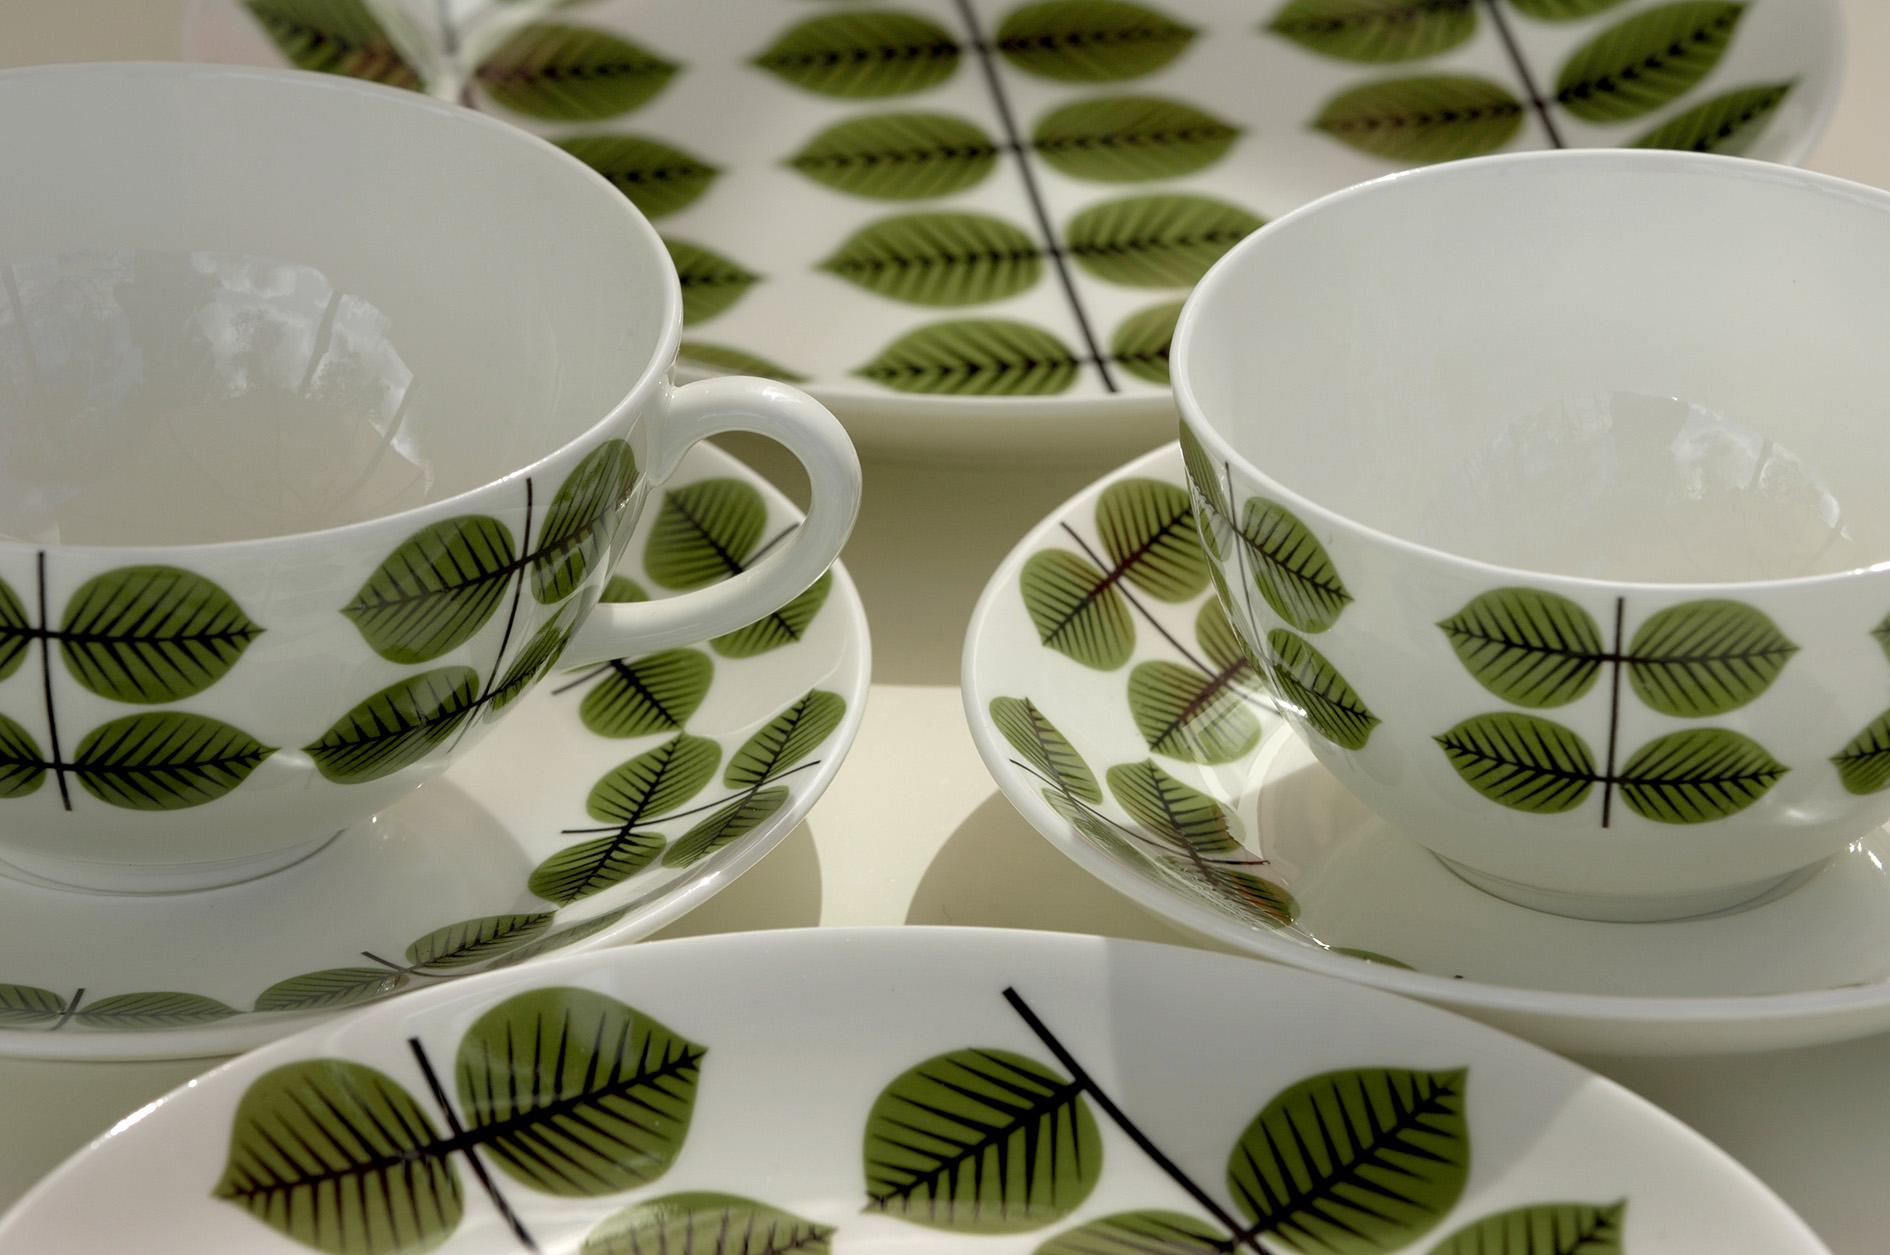 Porcelaine cups and saucers with a green leaf pattern.